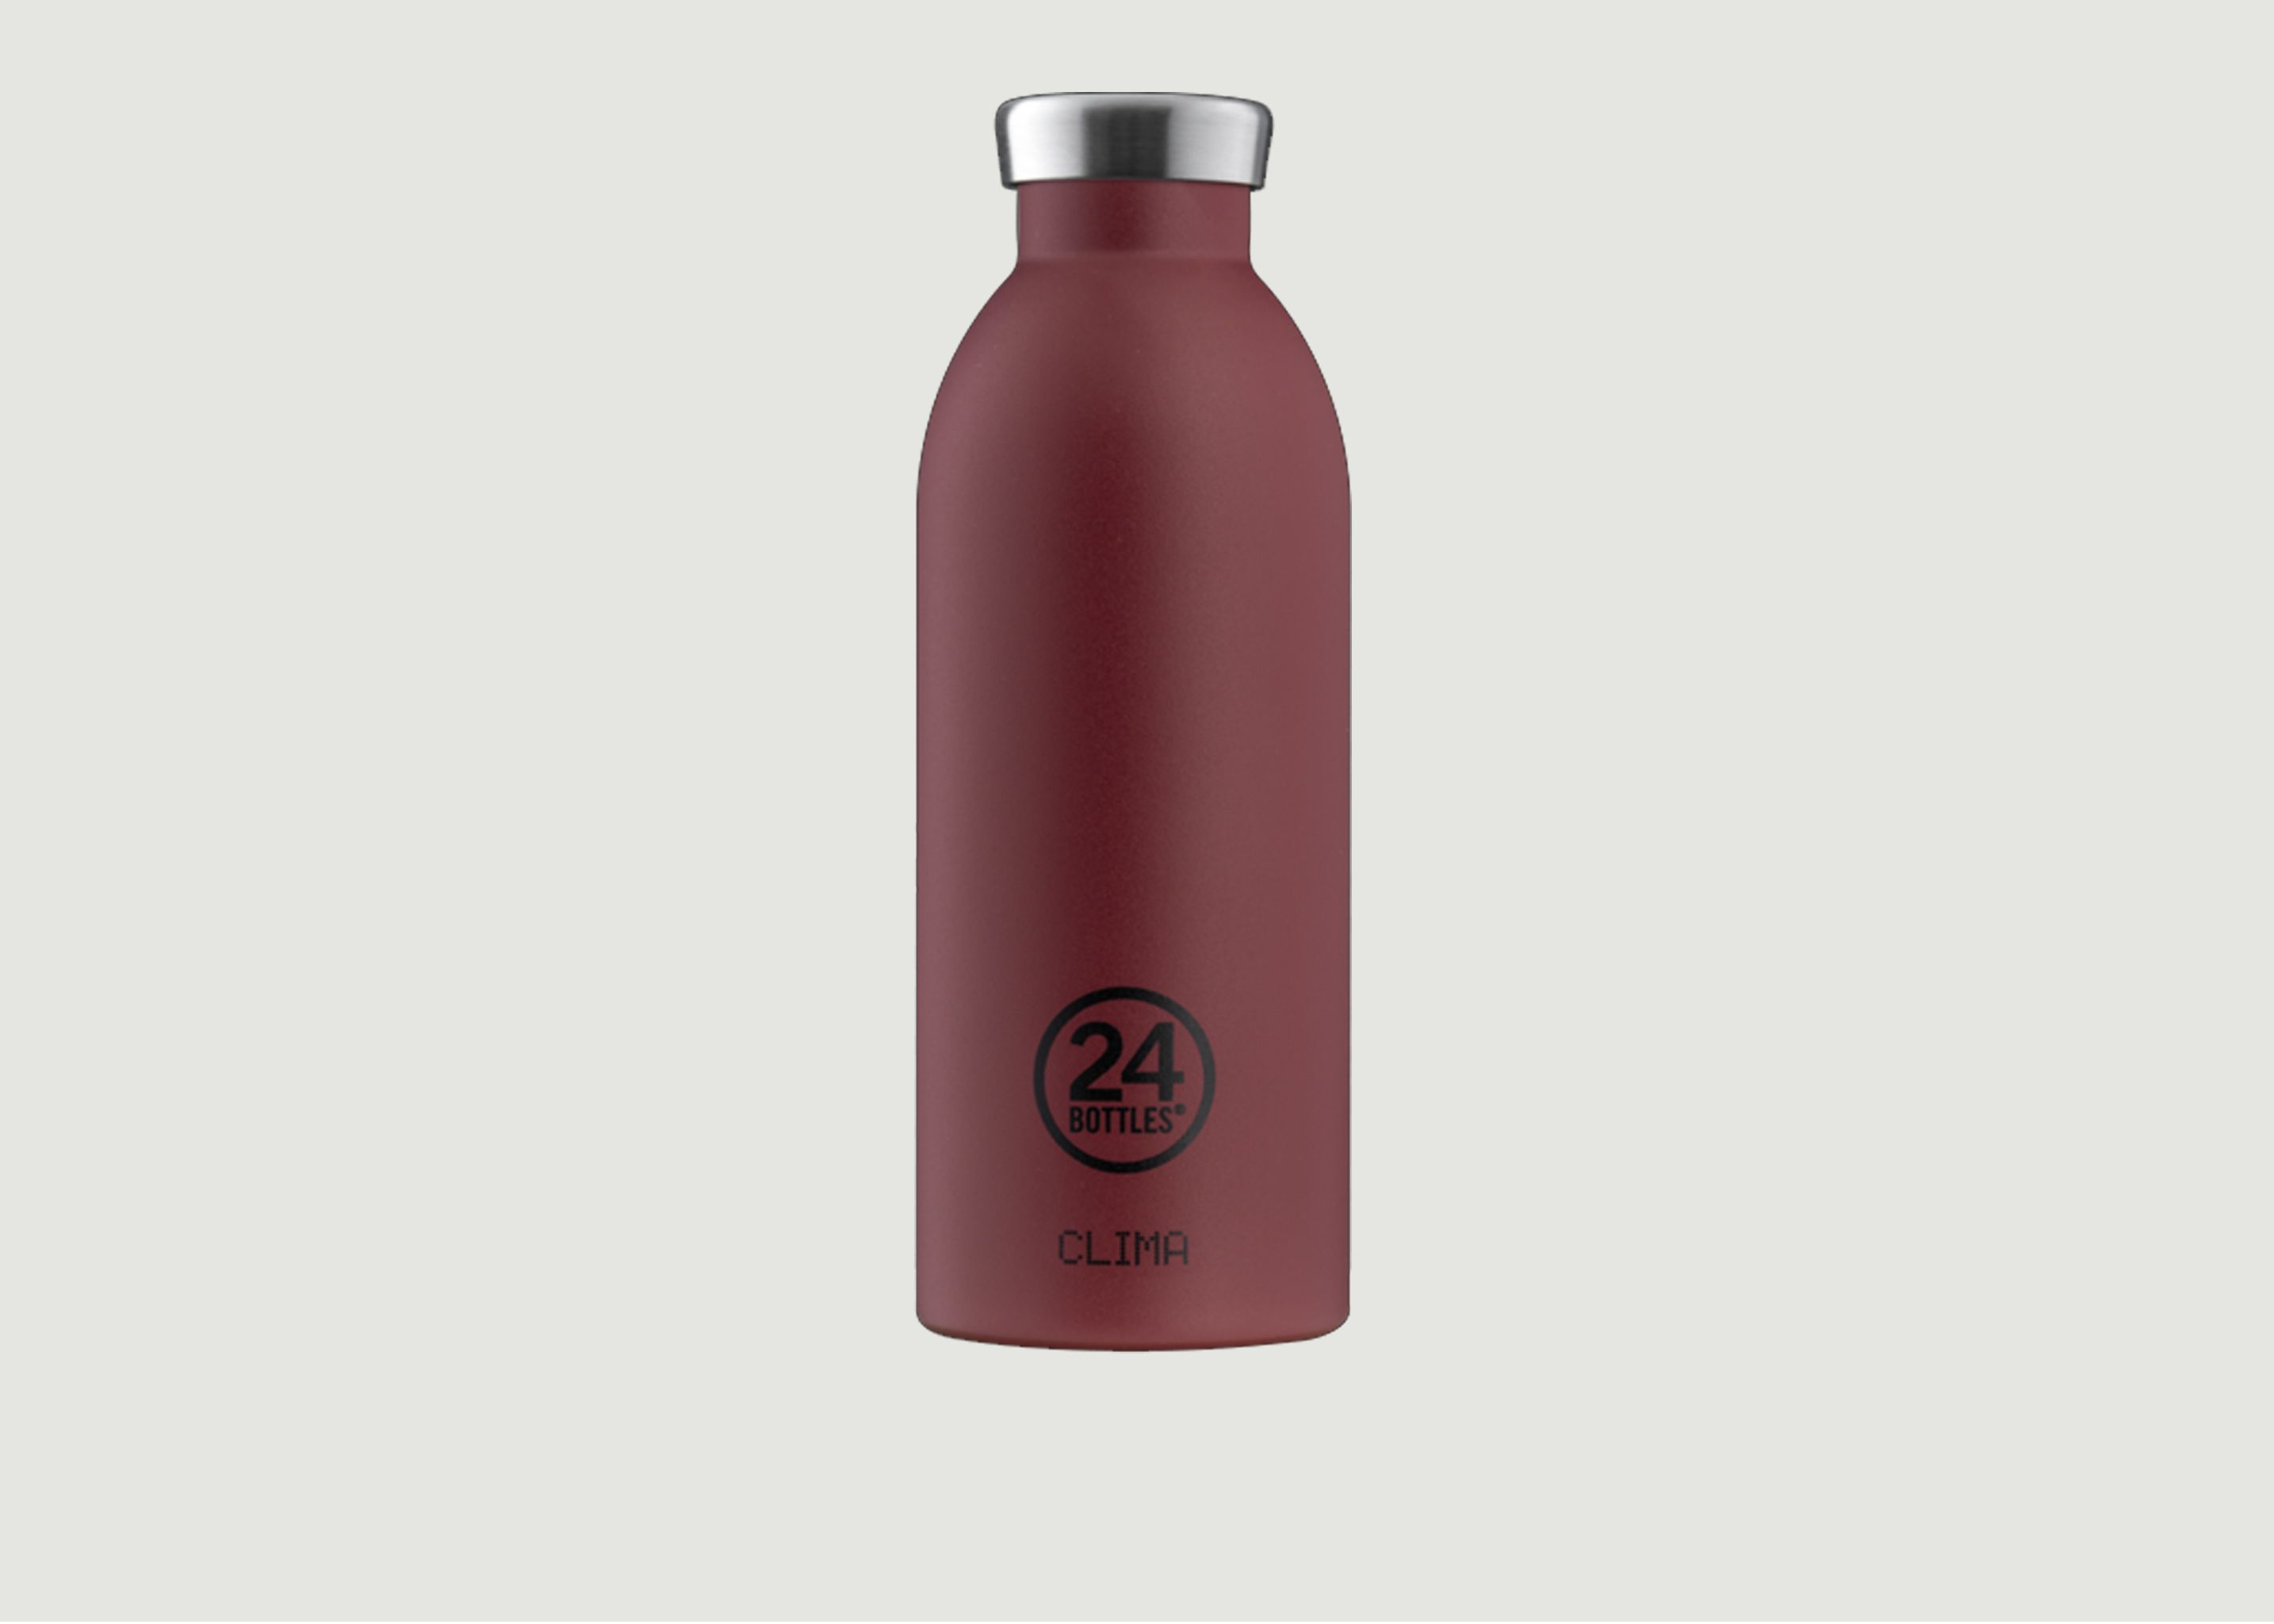 Stone Country Red Clima Bottle 500 ml - 24 Bottles